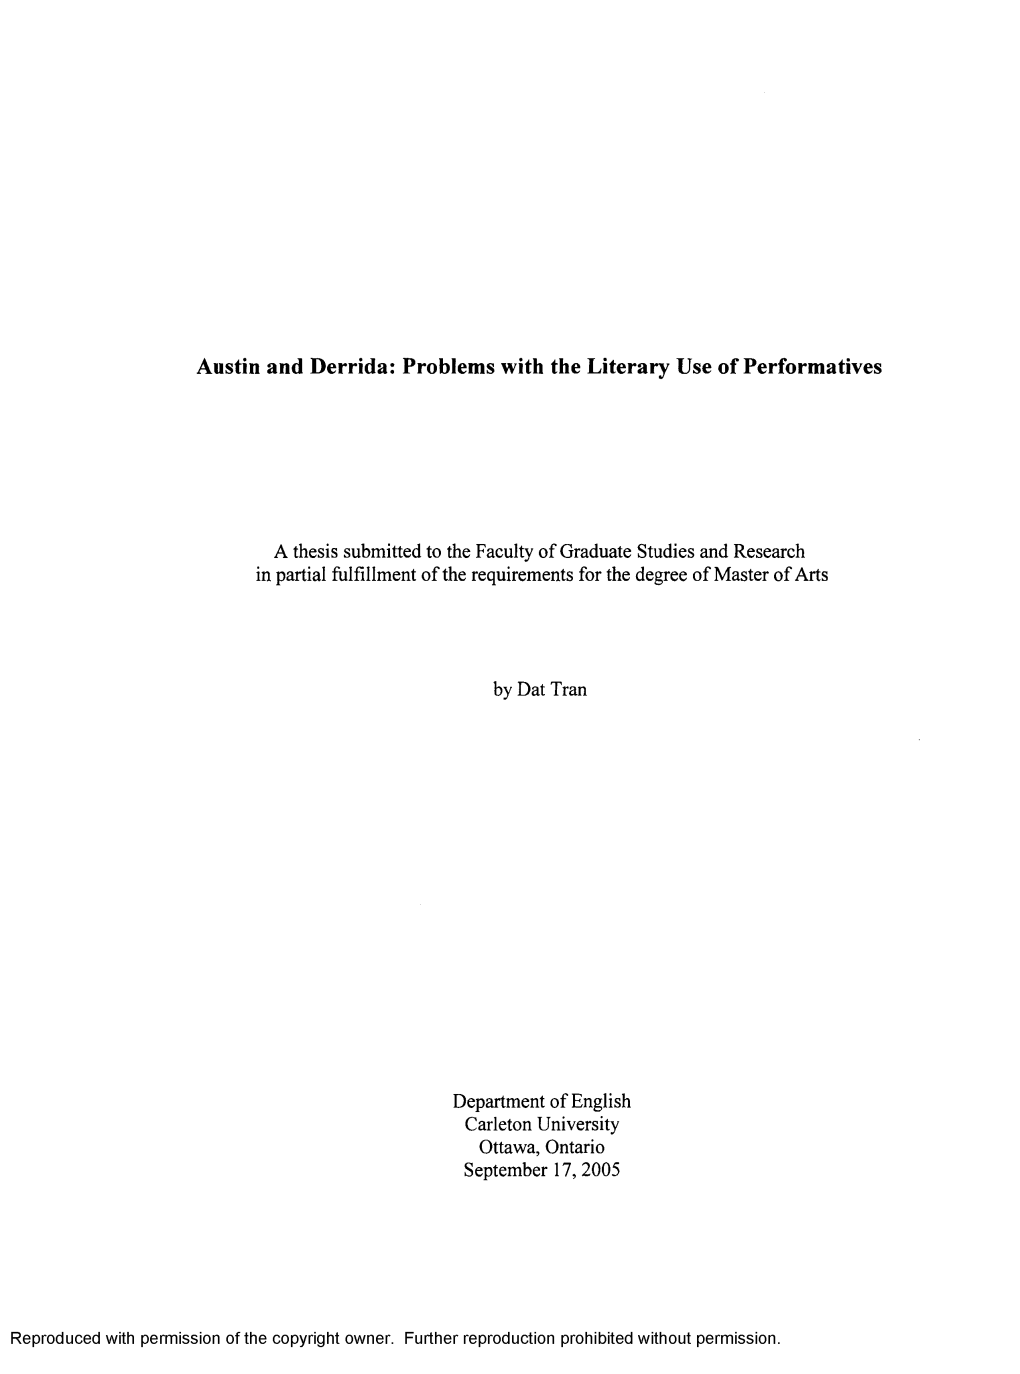 Austin and Derrida: Problems with the Literary Use of Performatives